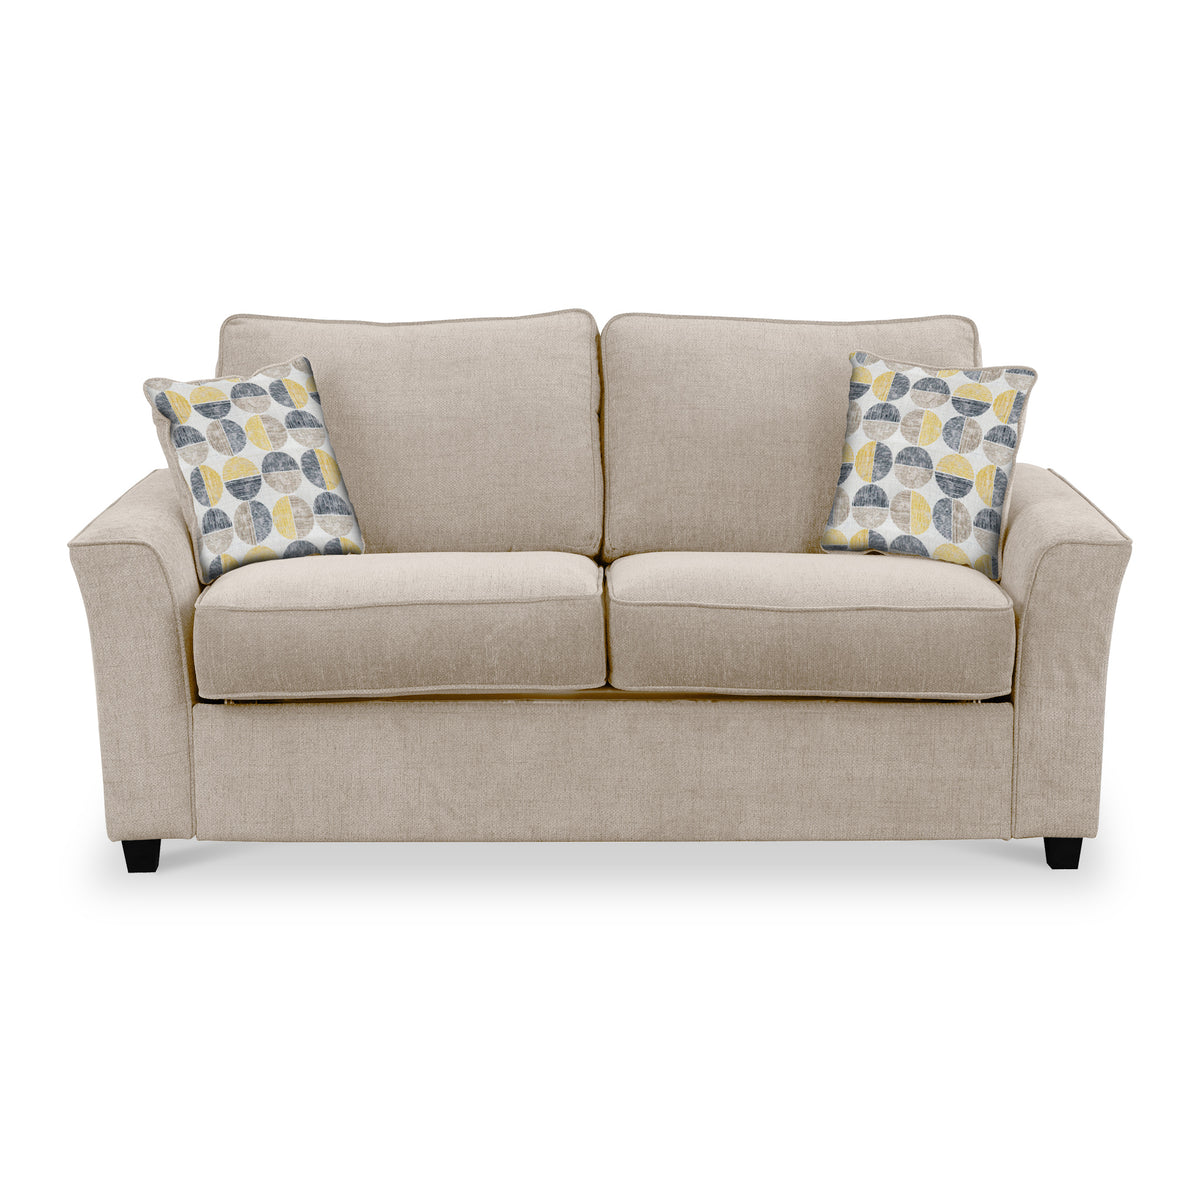 Boston 2 Seater Sofabed in Fawn with Rufus Beige Cushions by Roseland Furniture